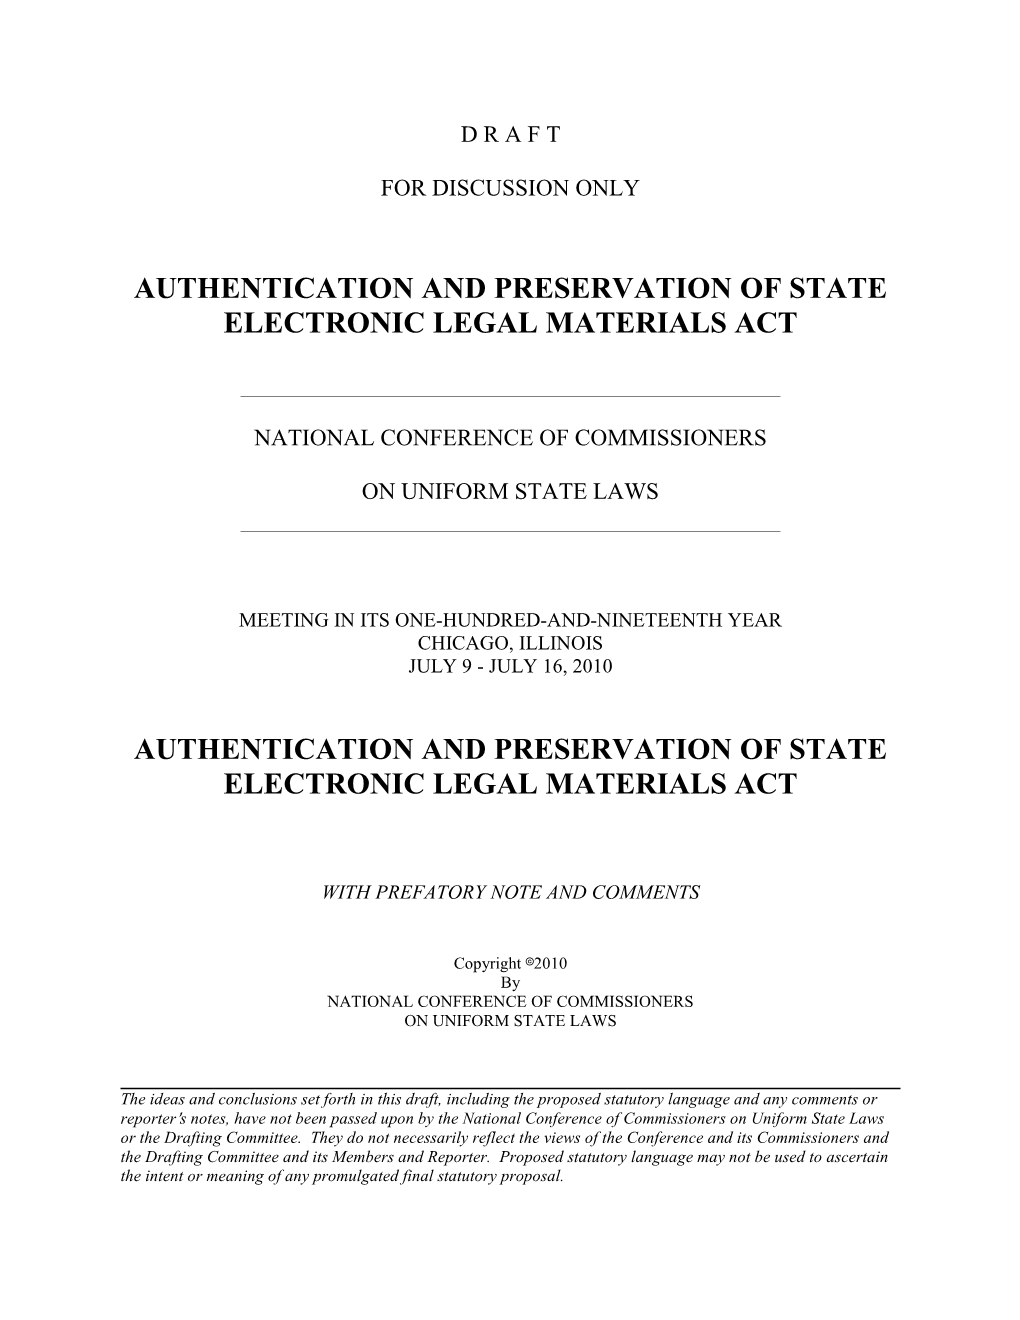 Authentication and Preservation of State Electronic Legal Materials Act